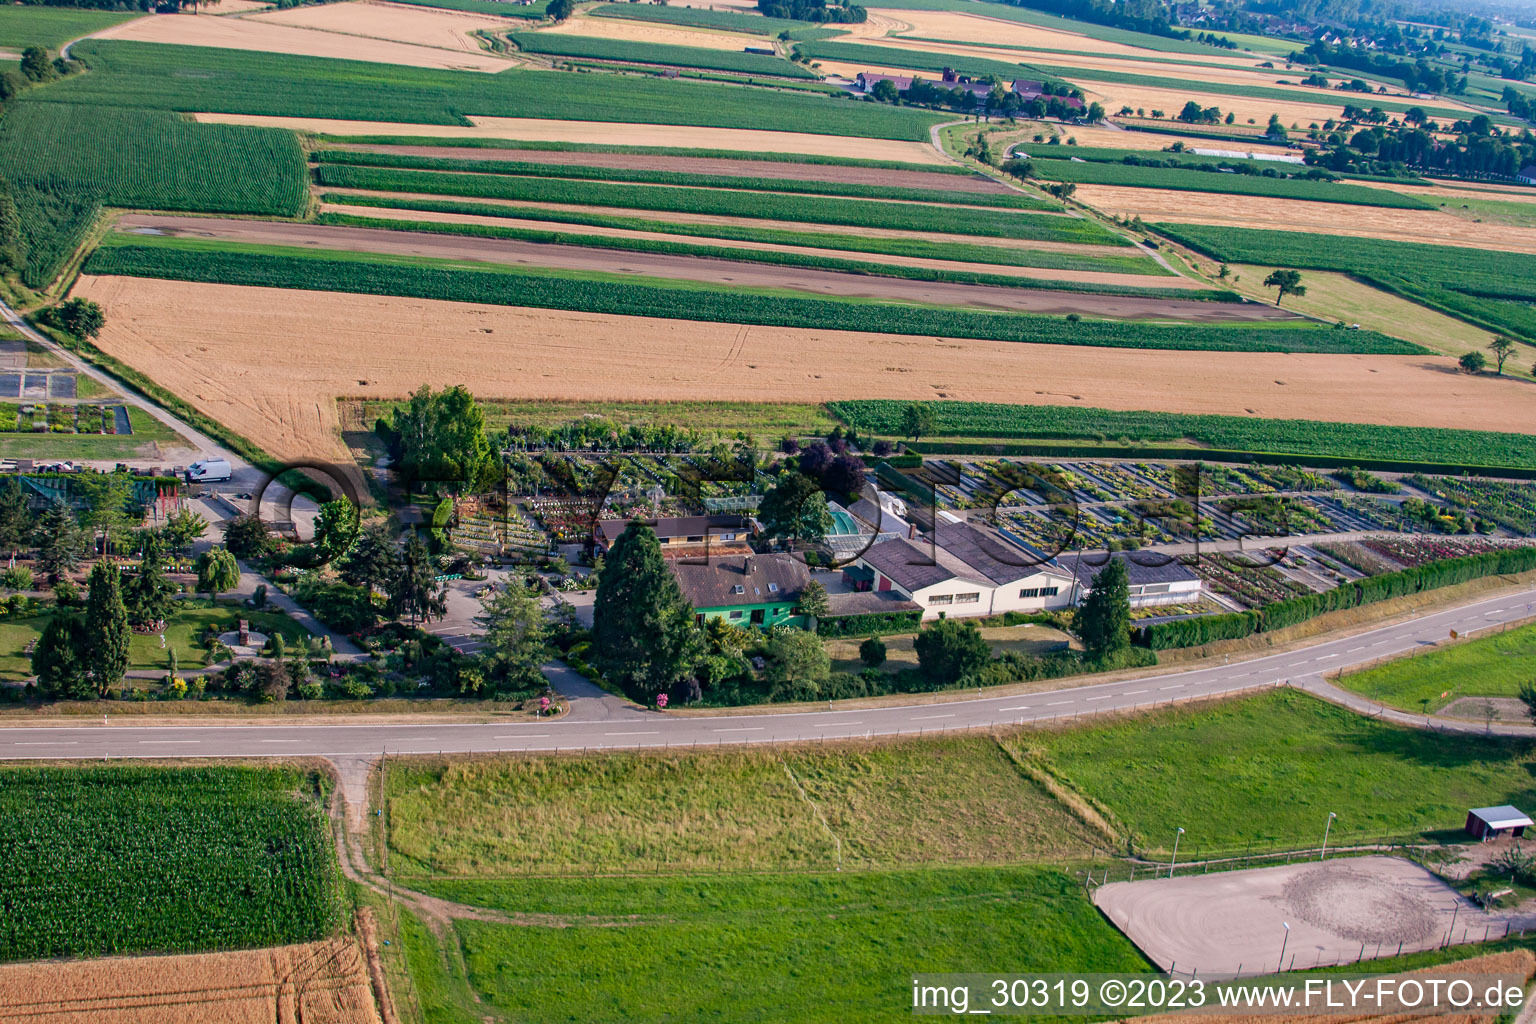 Garden Times Black in the district Bodersweier in Kehl in the state Baden-Wuerttemberg, Germany viewn from the air